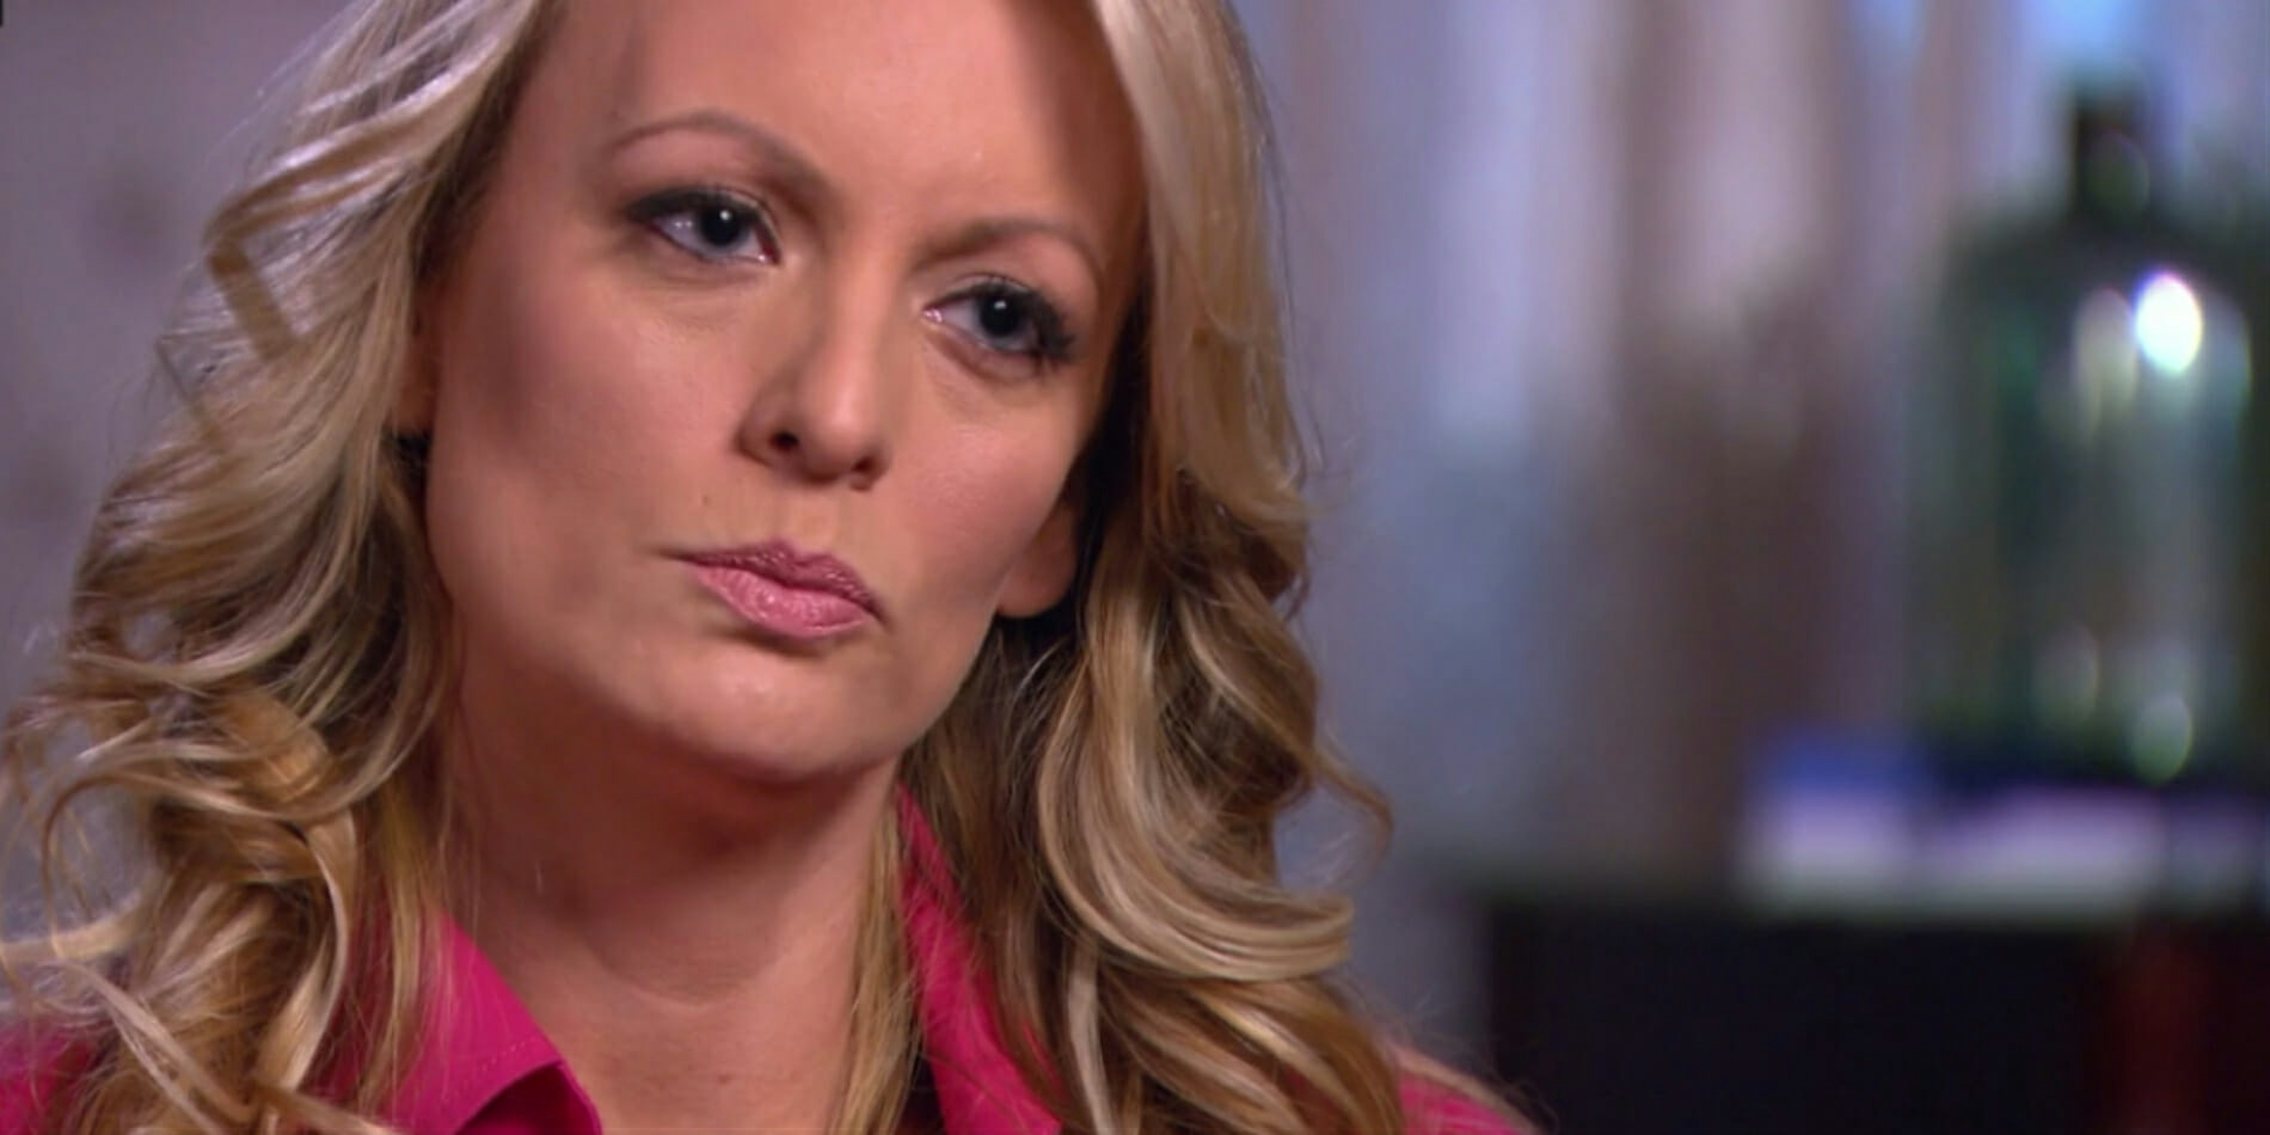 Stormy Daniels claims her alleged affair with Donald Trump isn't a #MeToo moment.